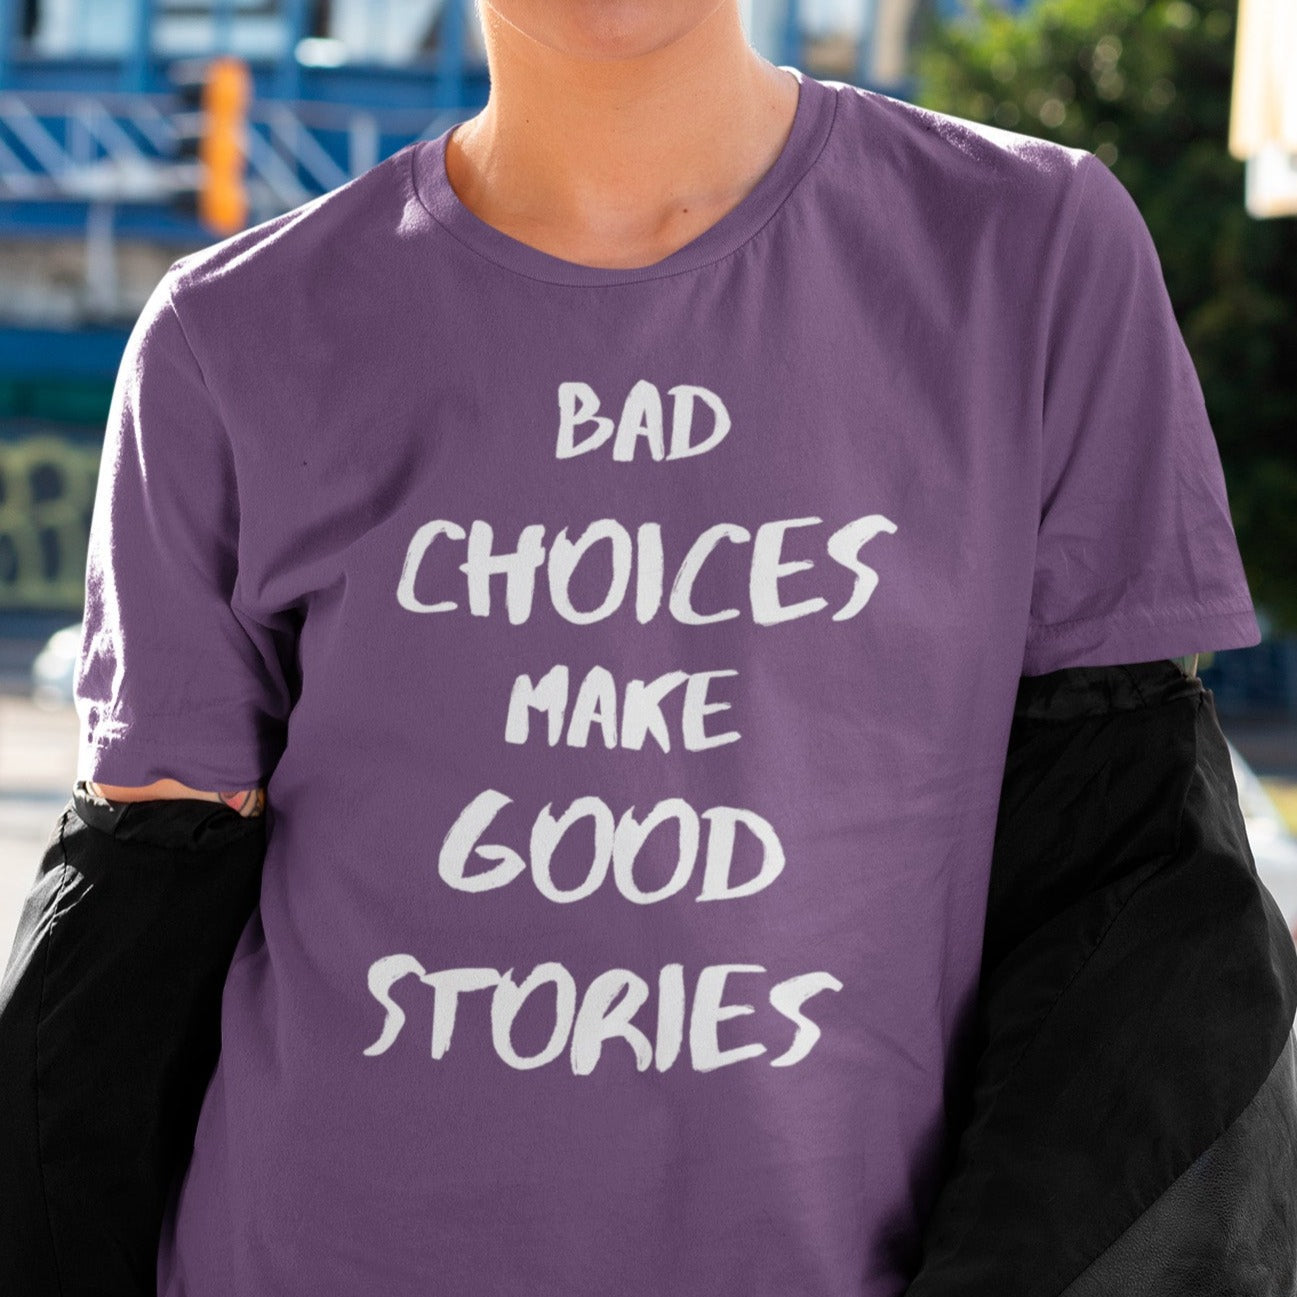 bad-choices-make-good-stories-team-purple-t-shirt-funny-unisex-mockup-of-an-edgy-woman-with-an-androgynous-style